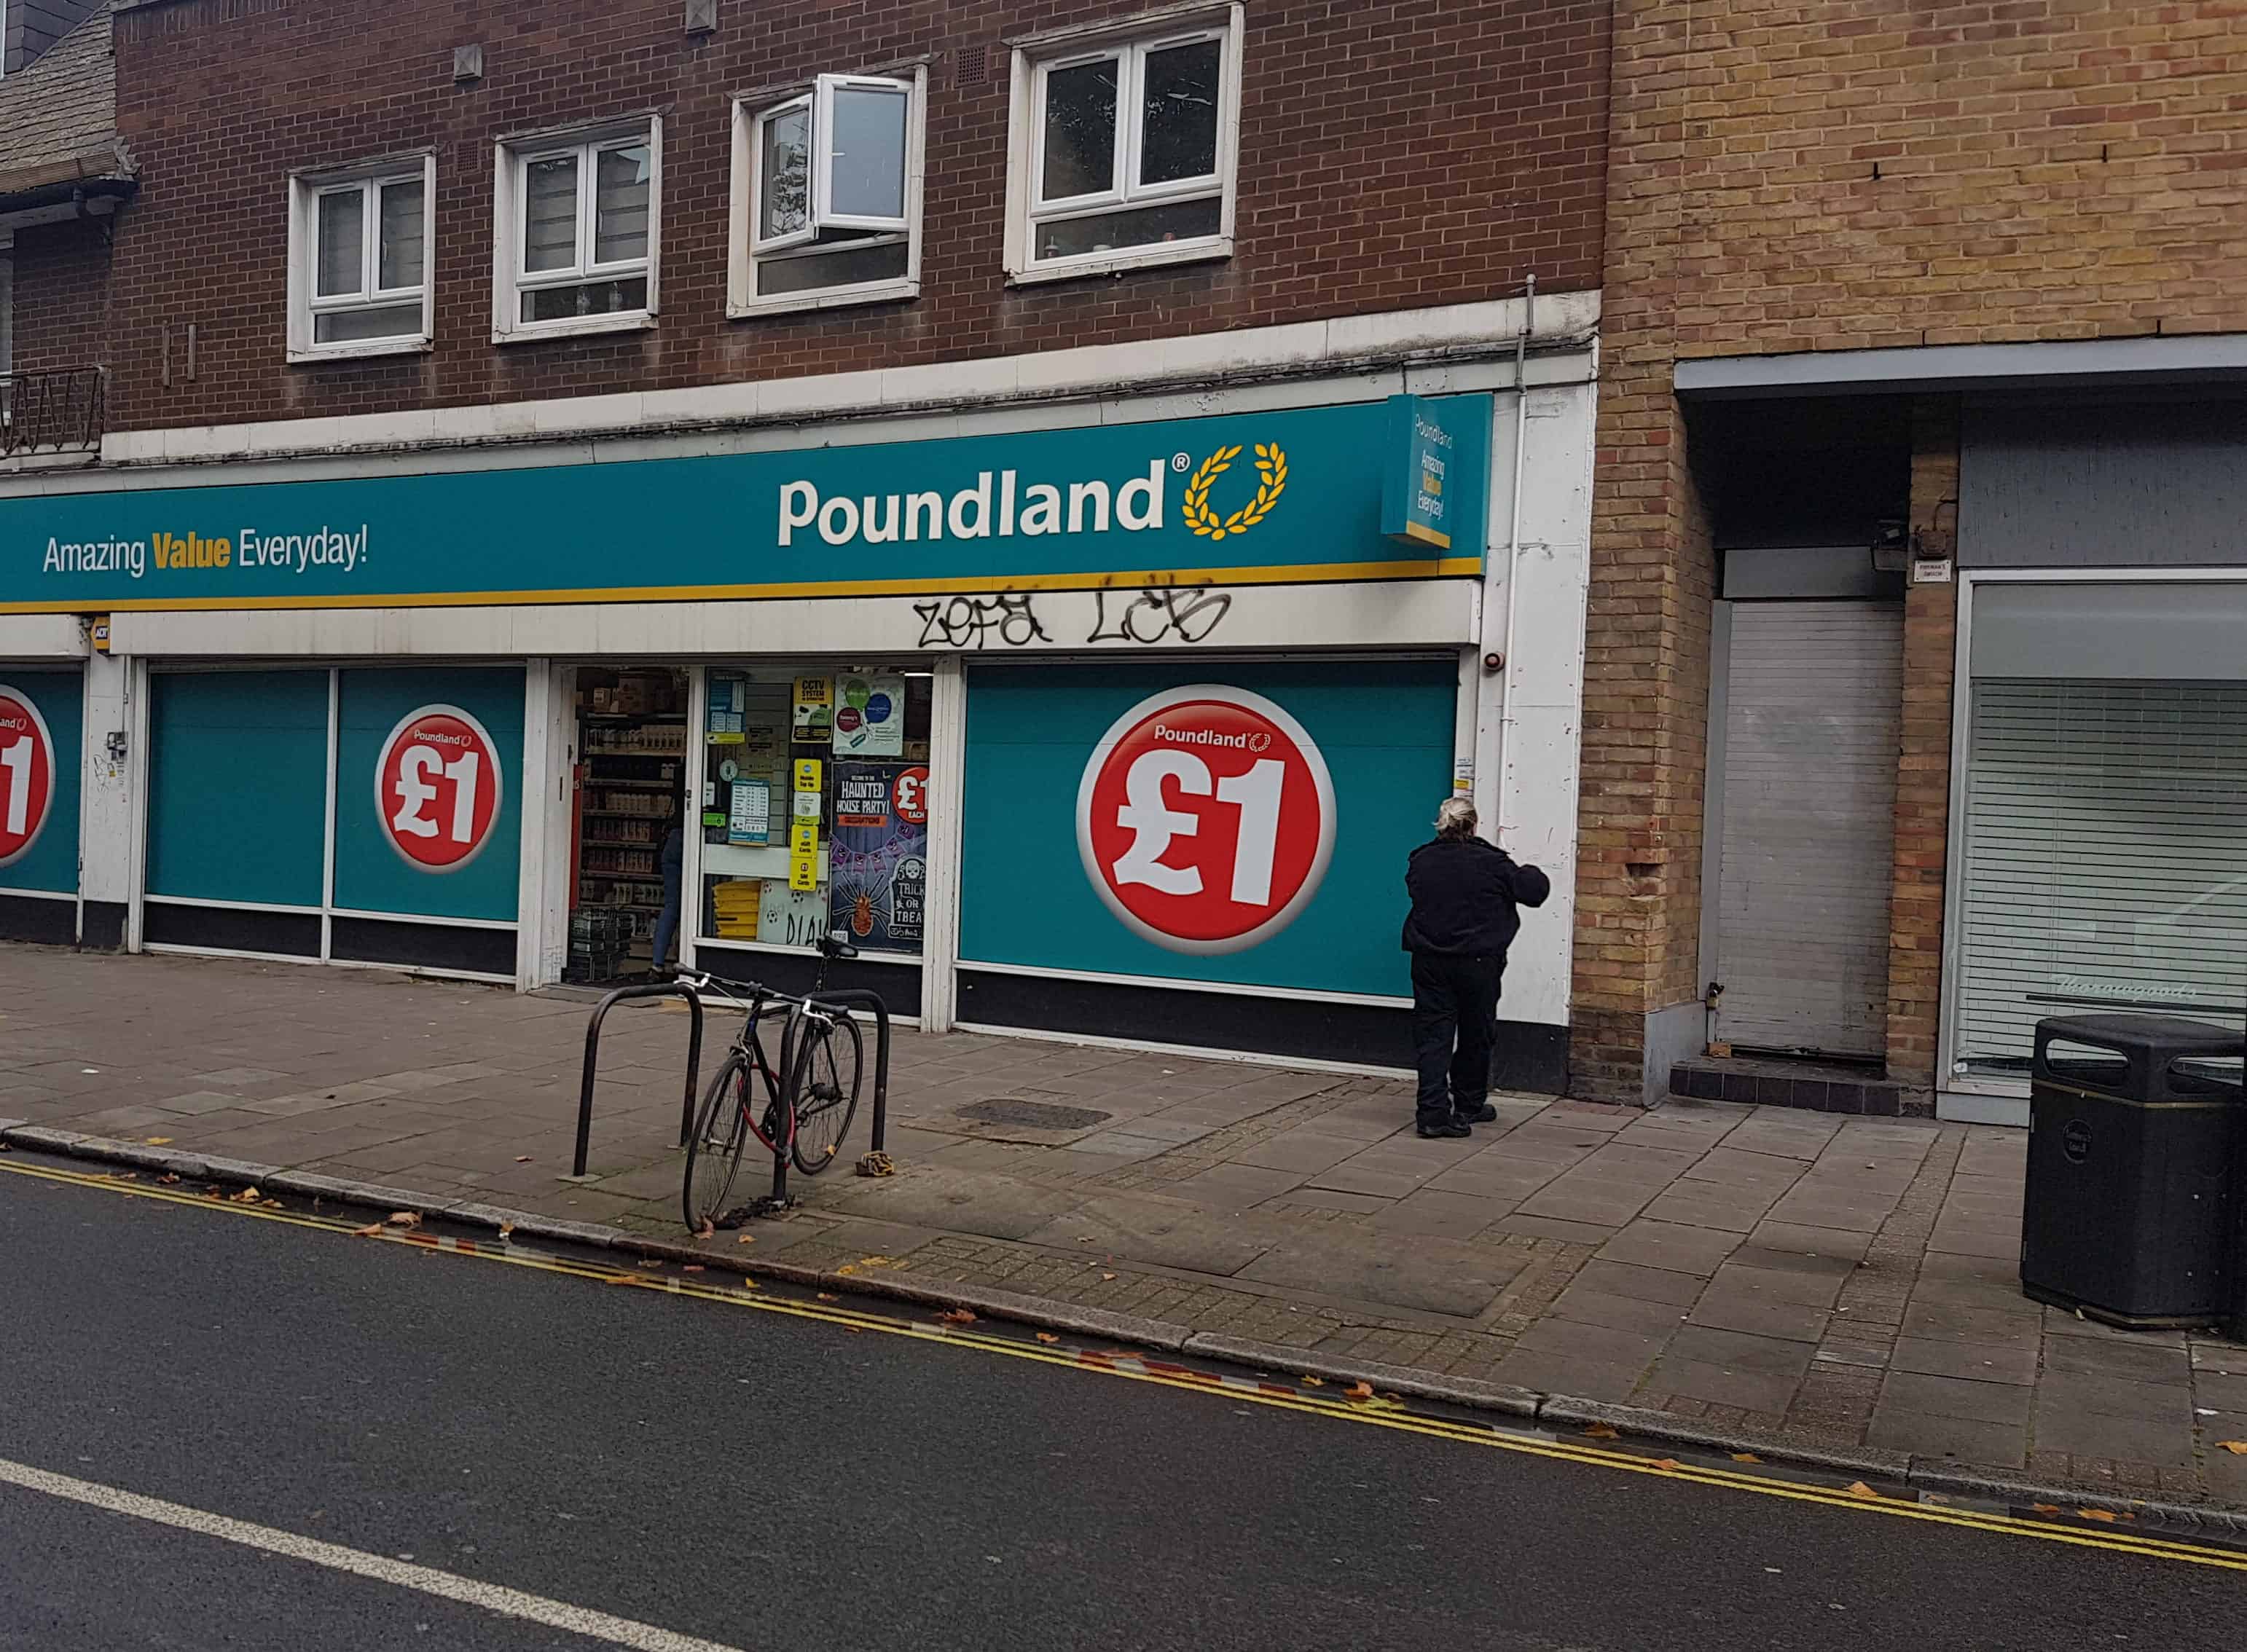 A police officer seen widening up the cordon after the bottling incident near Poundland this morning